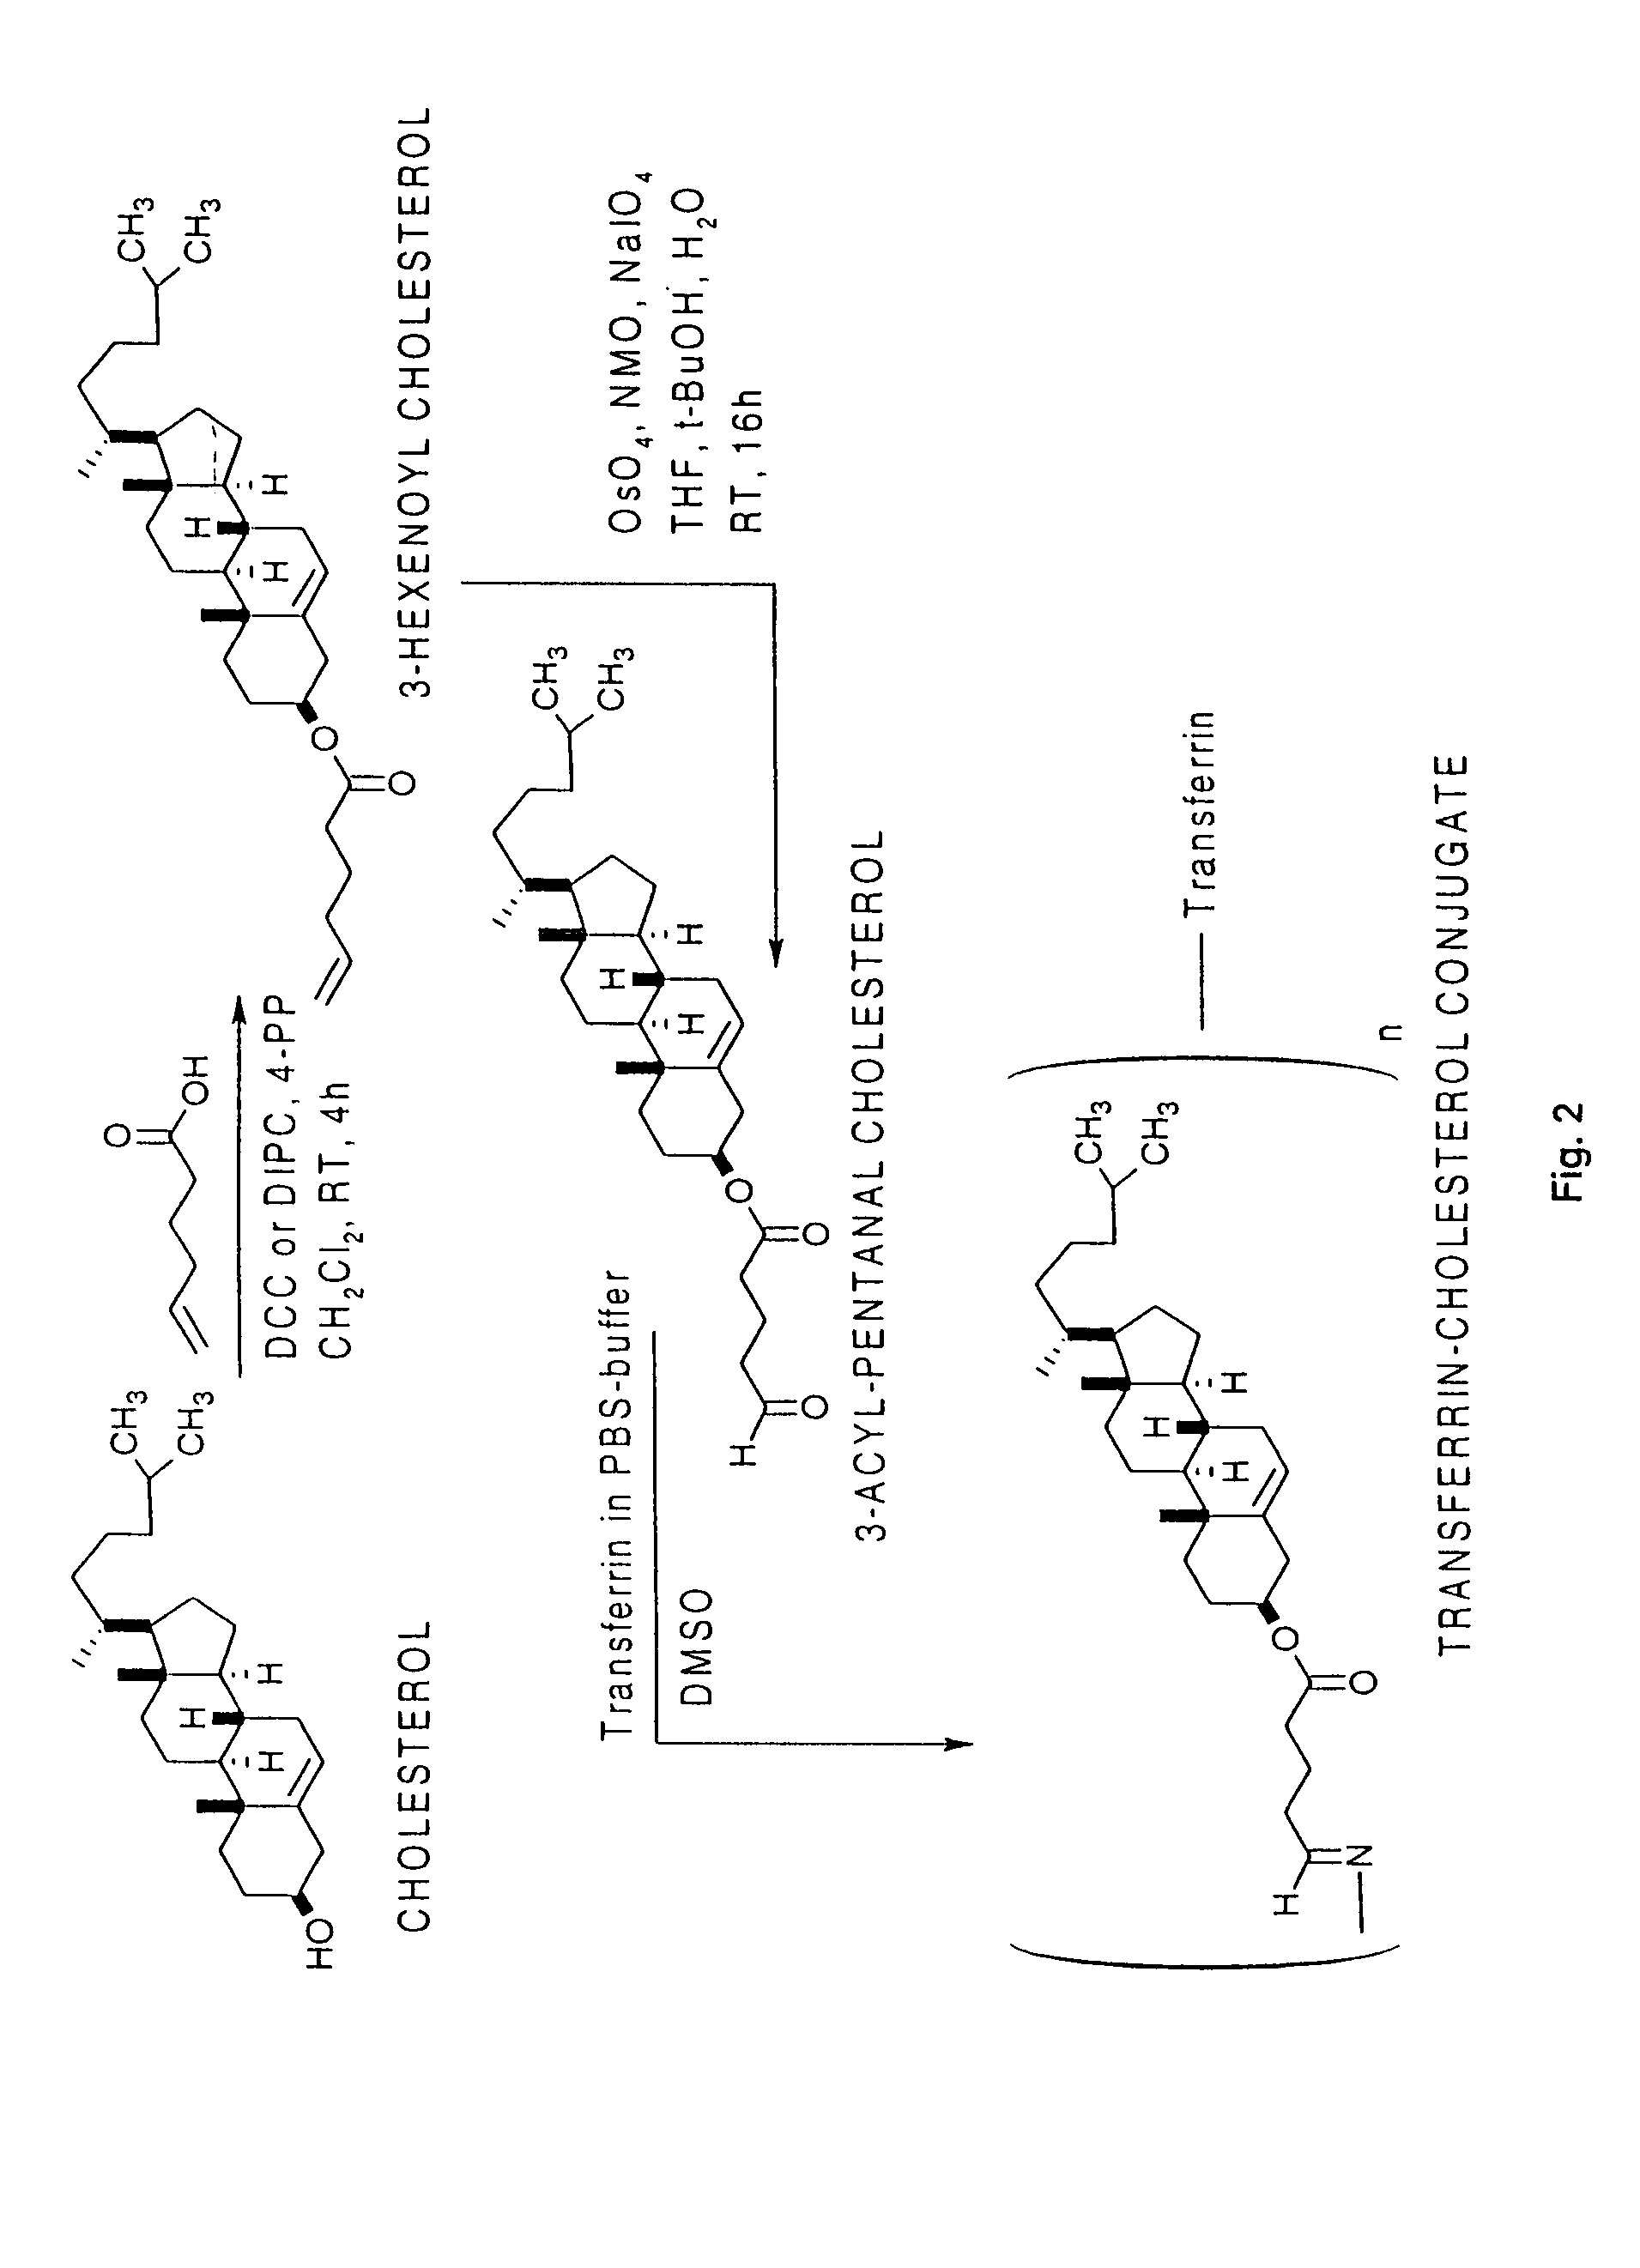 Molecular conjugates for use in treatment of cancer